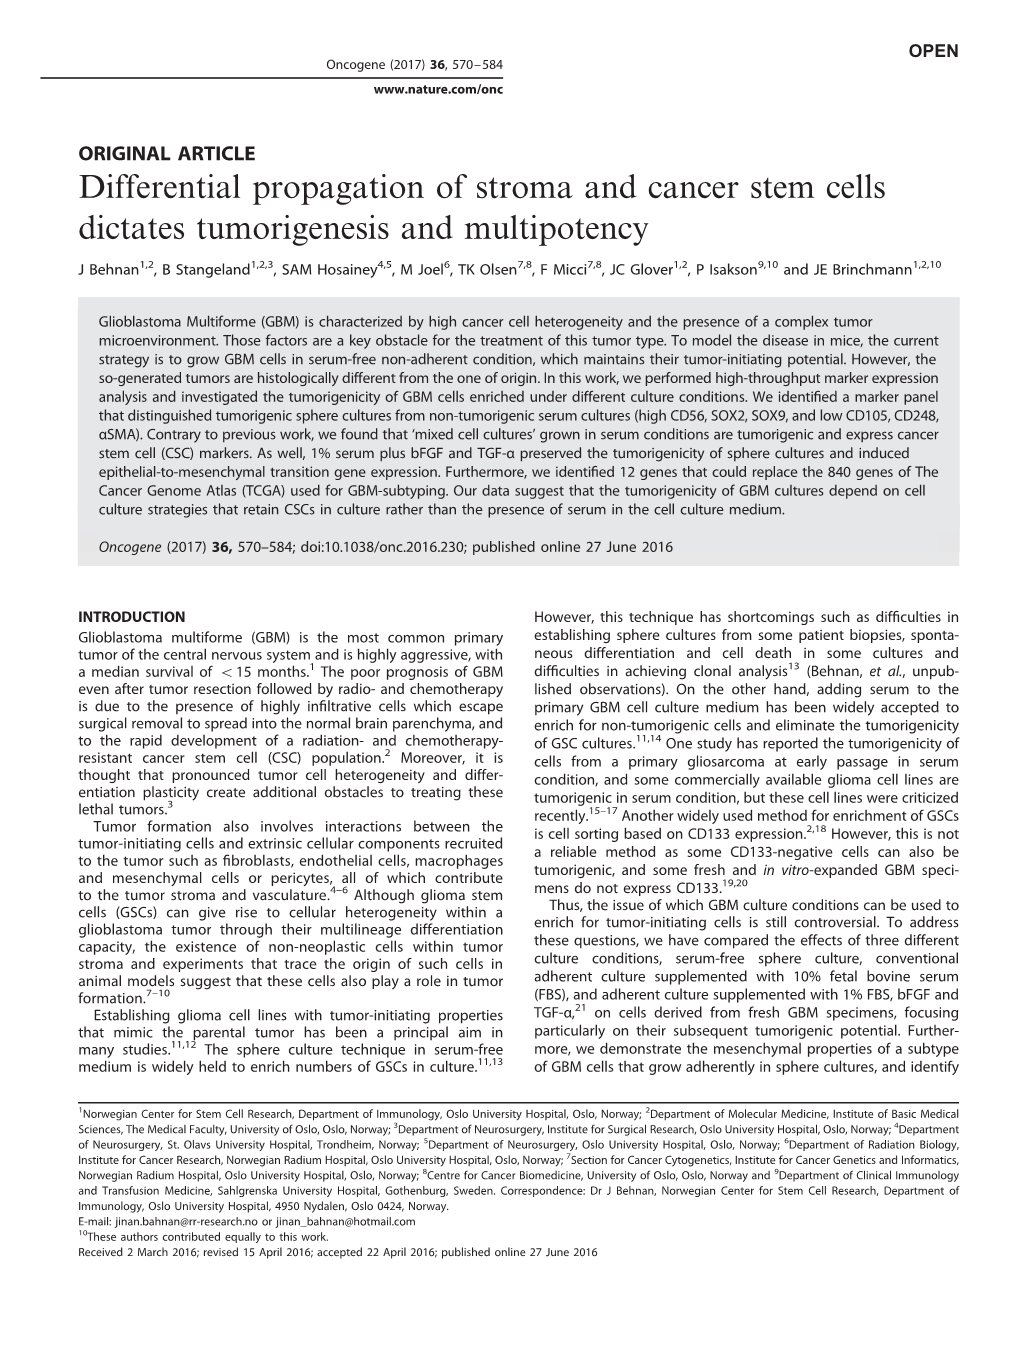 Differential Propagation of Stroma and Cancer Stem Cells Dictates Tumorigenesis and Multipotency